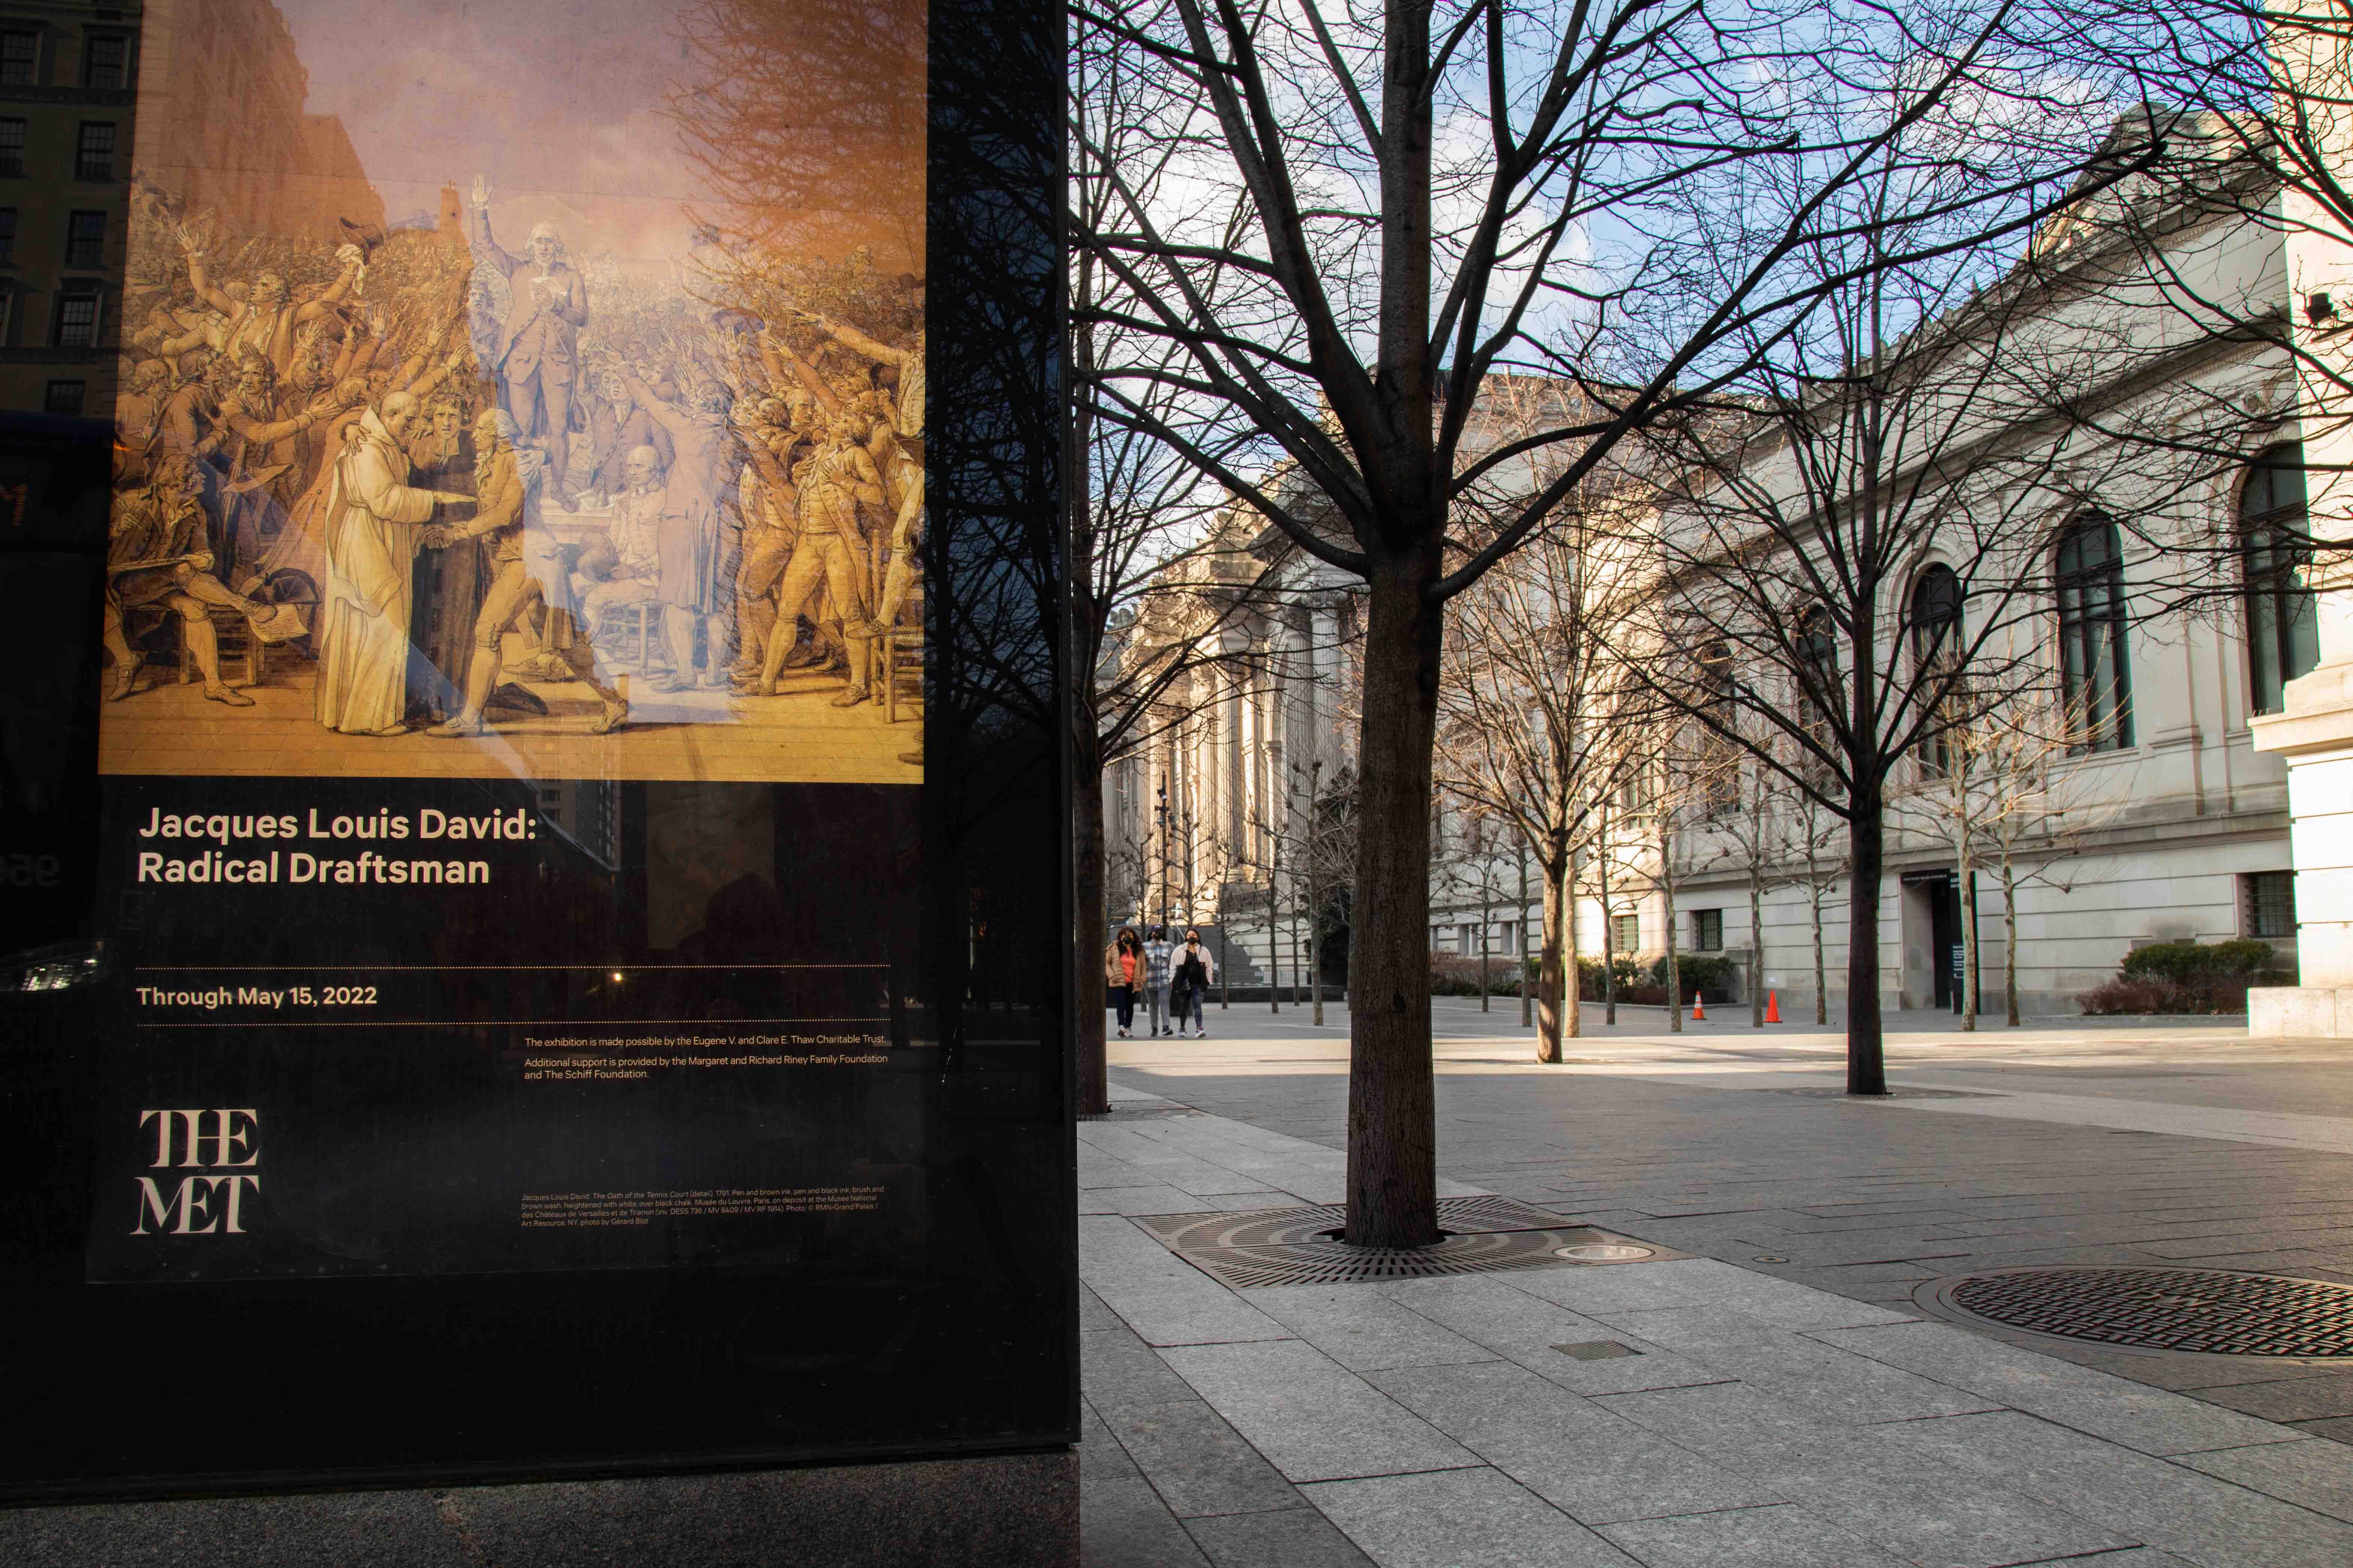 A sign outside the Met promoting the Jacques Louis David exhibition.